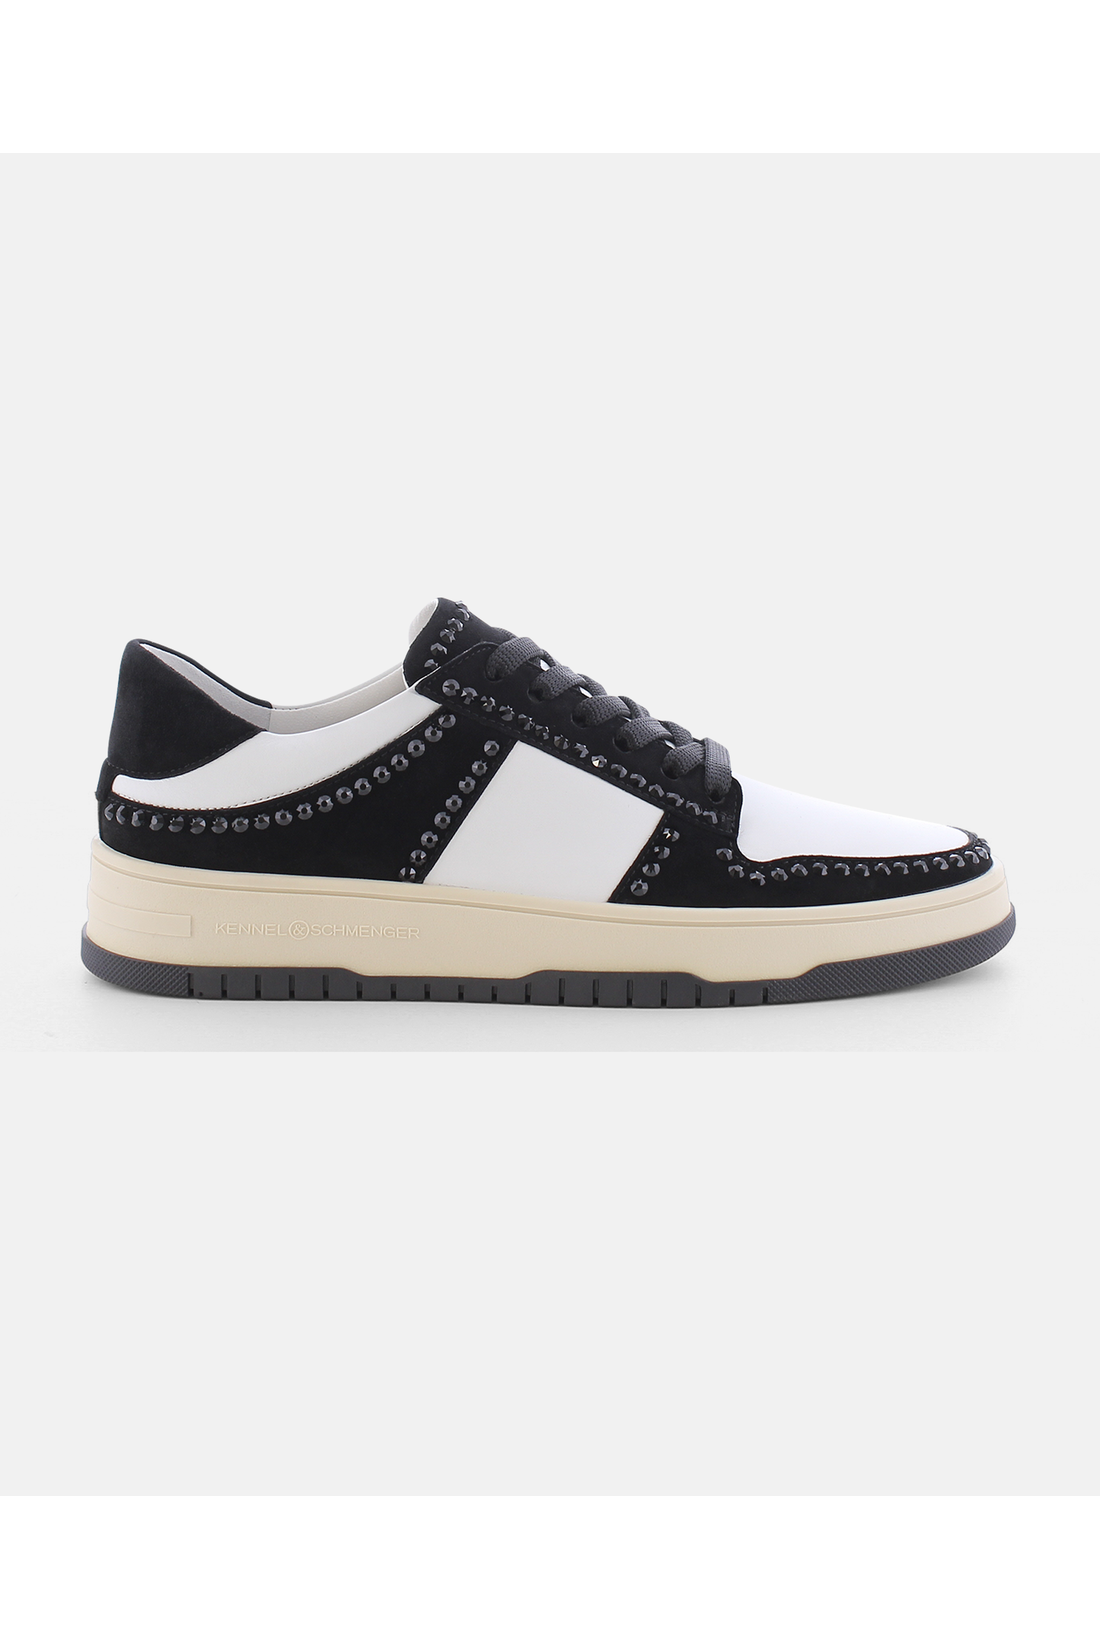 Kennel-Schmenger-OUTLET-SALE-DRIFT-Sneakers-ARCHIVE-COLLECTION-3_d8b9bfdc-73ff-46f2-9c48-4709228627ba.png